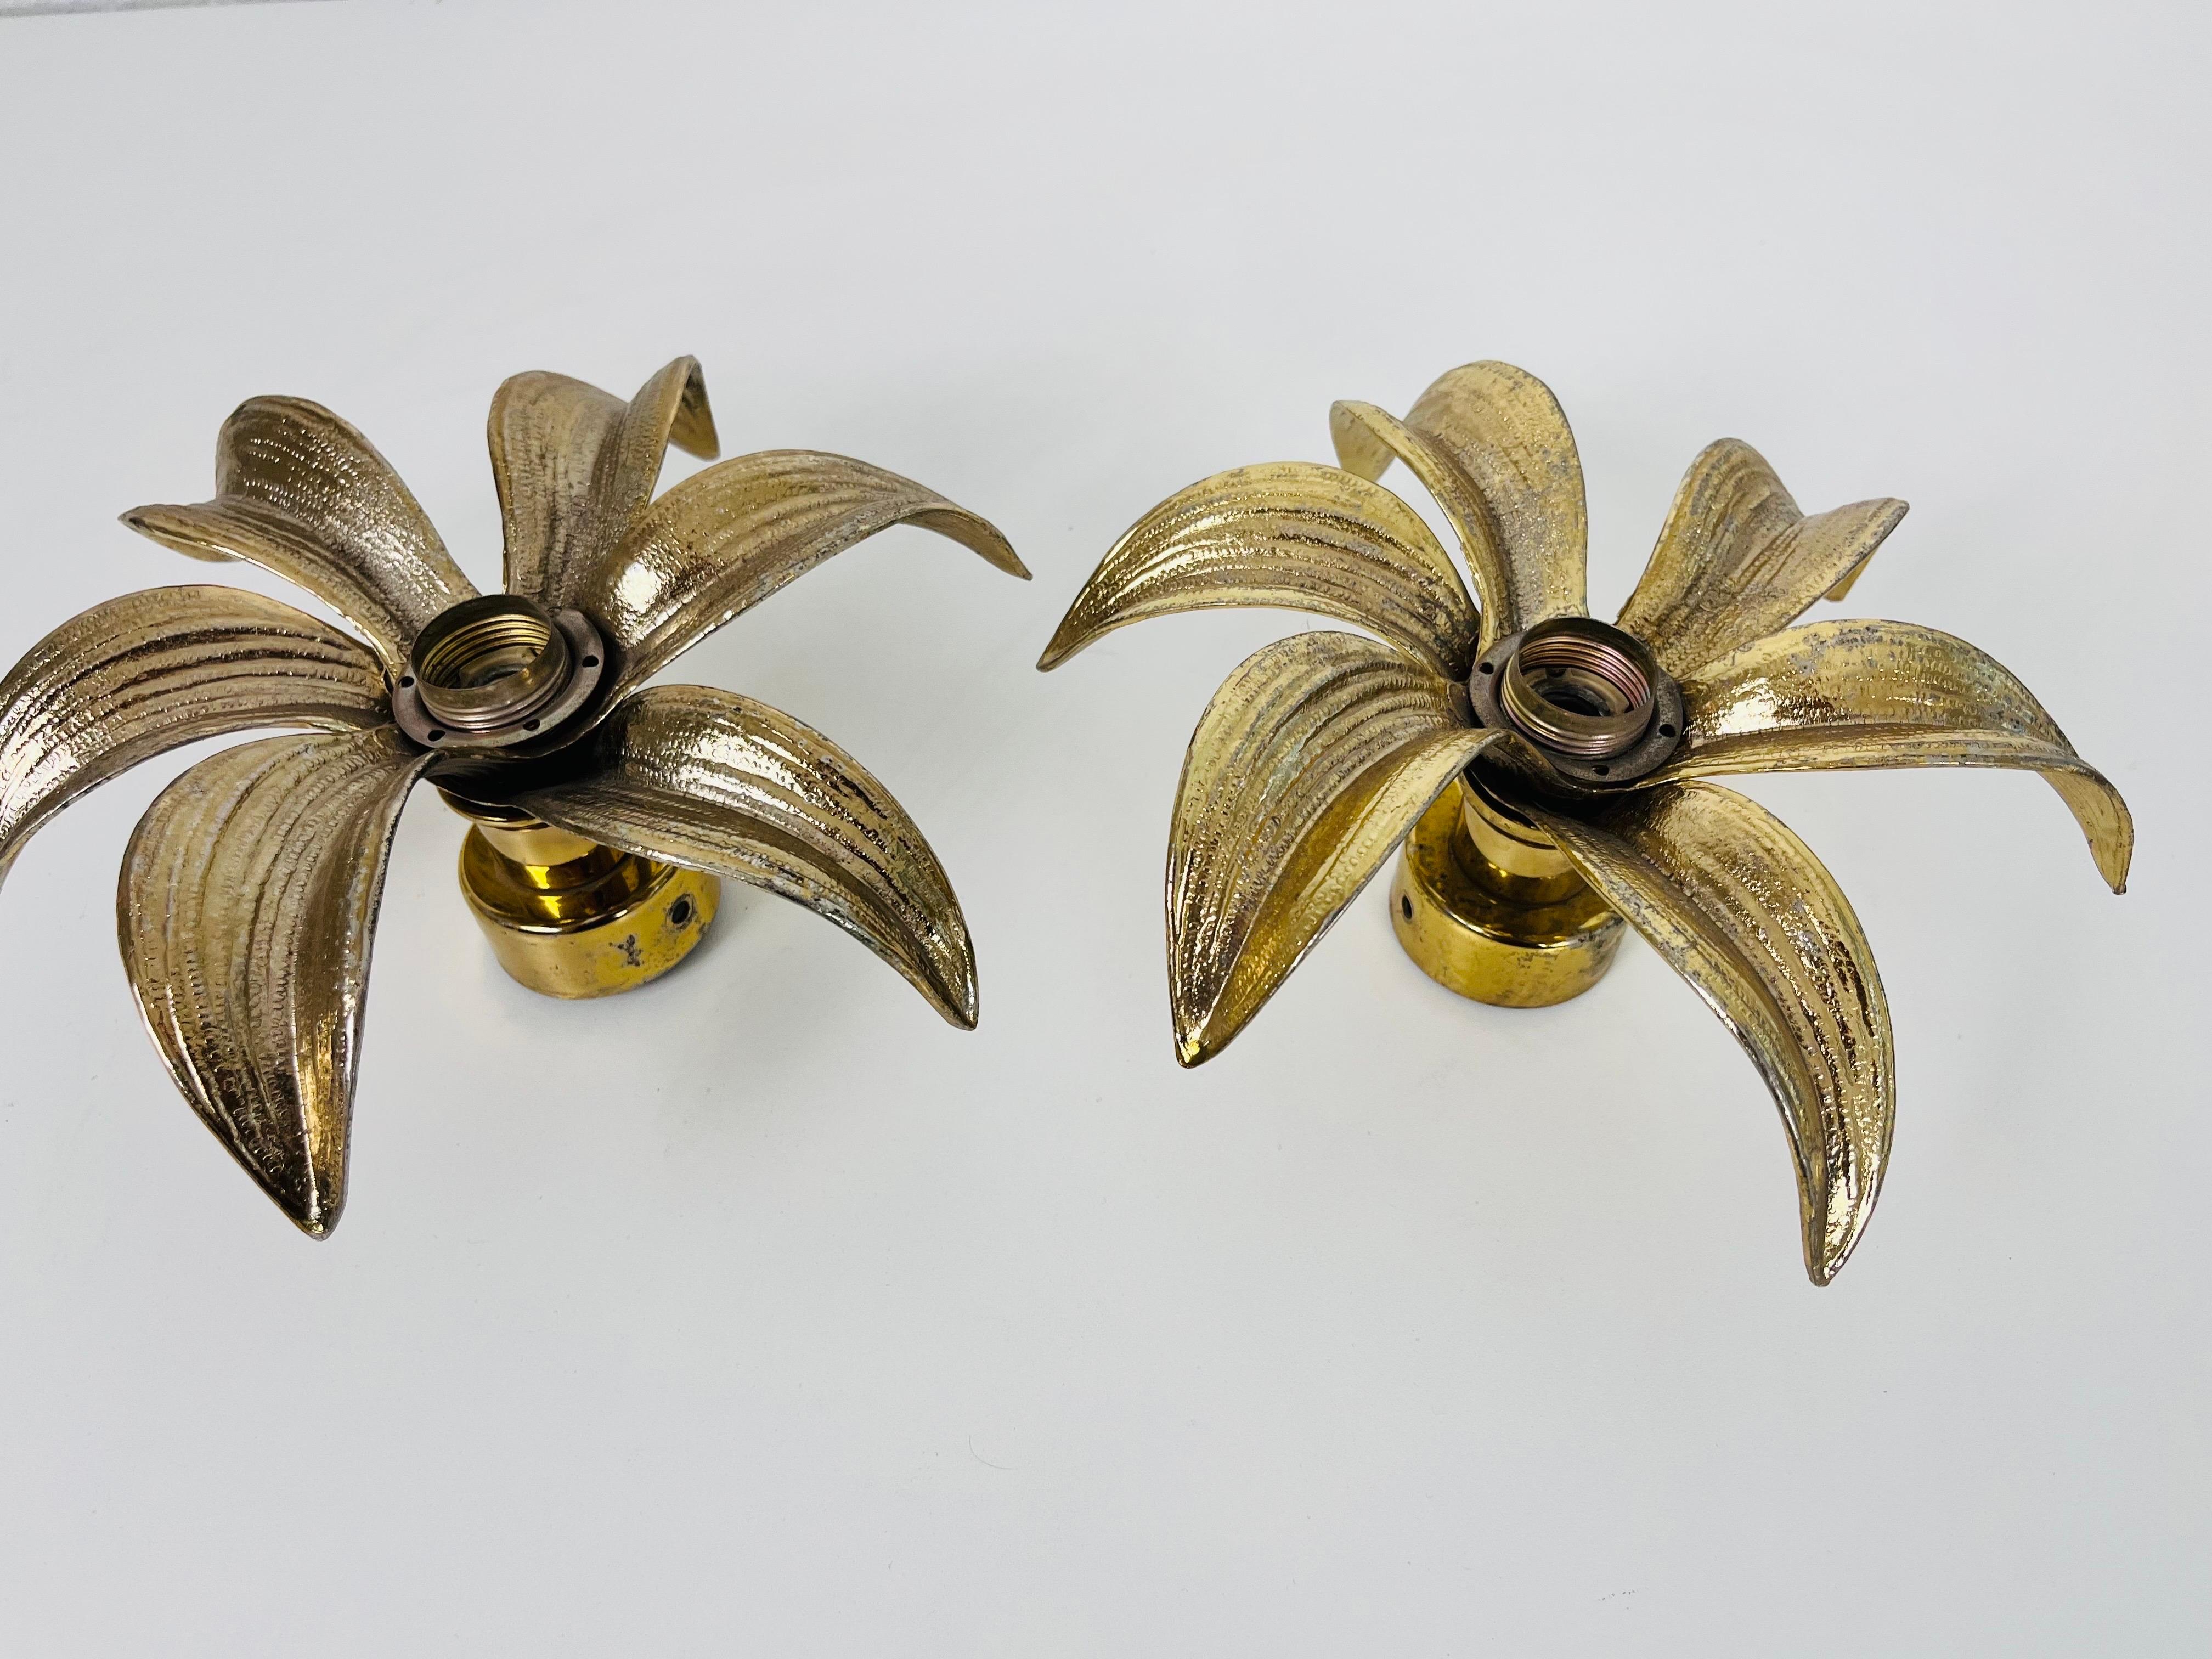 Hand-Crafted Set of 2 Golden Florentine Flower Shape Flushmounts by Willy Daro for Massive For Sale